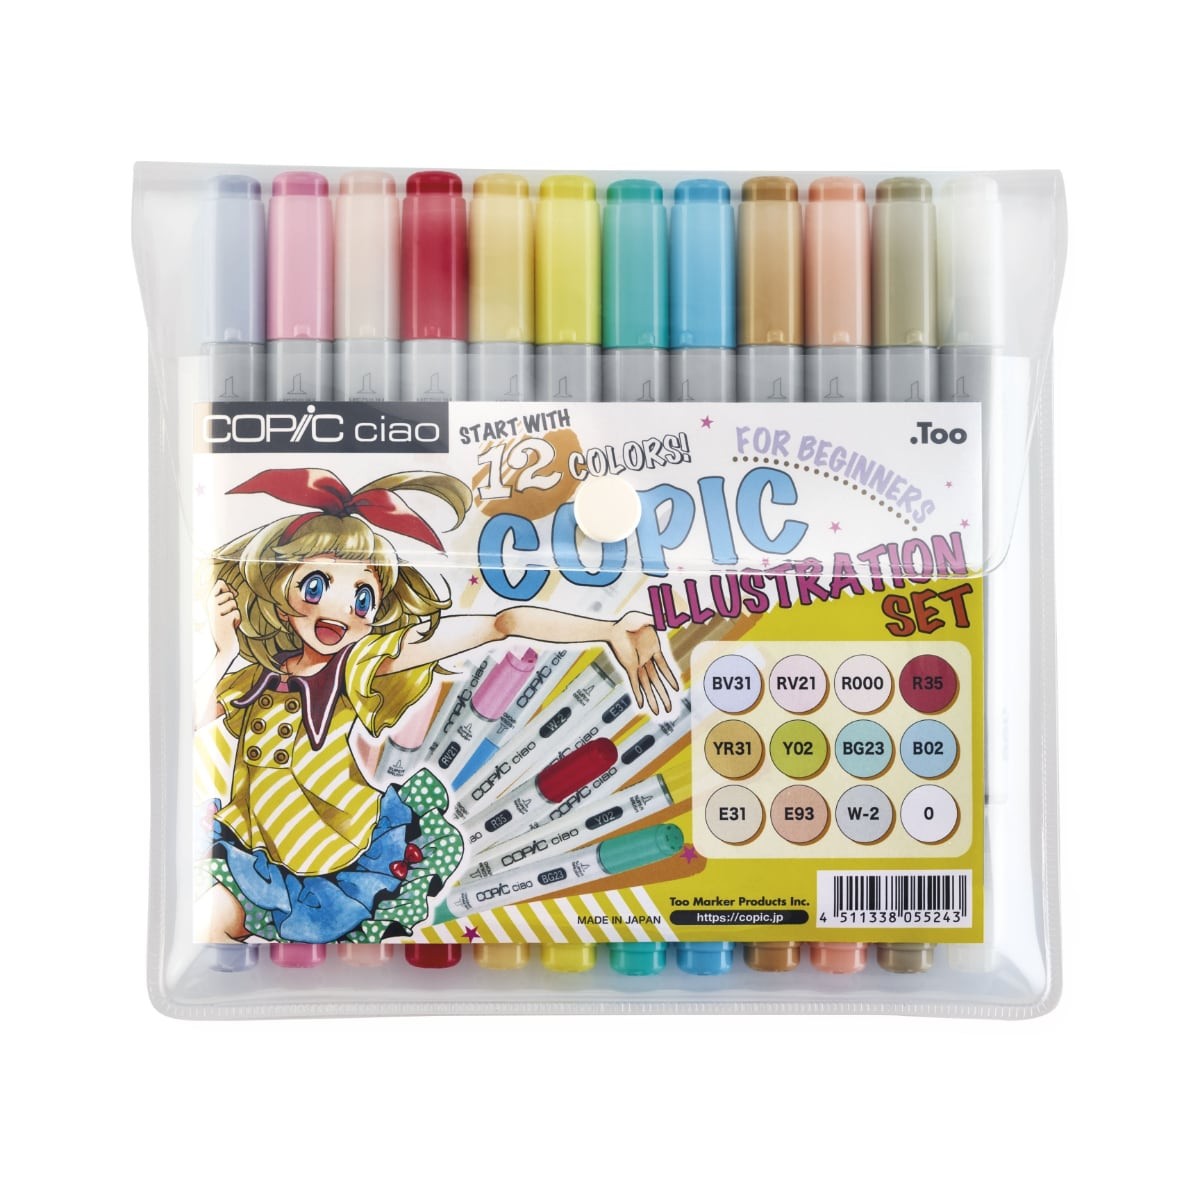 Copic Ciao 12 colors set for Beginners